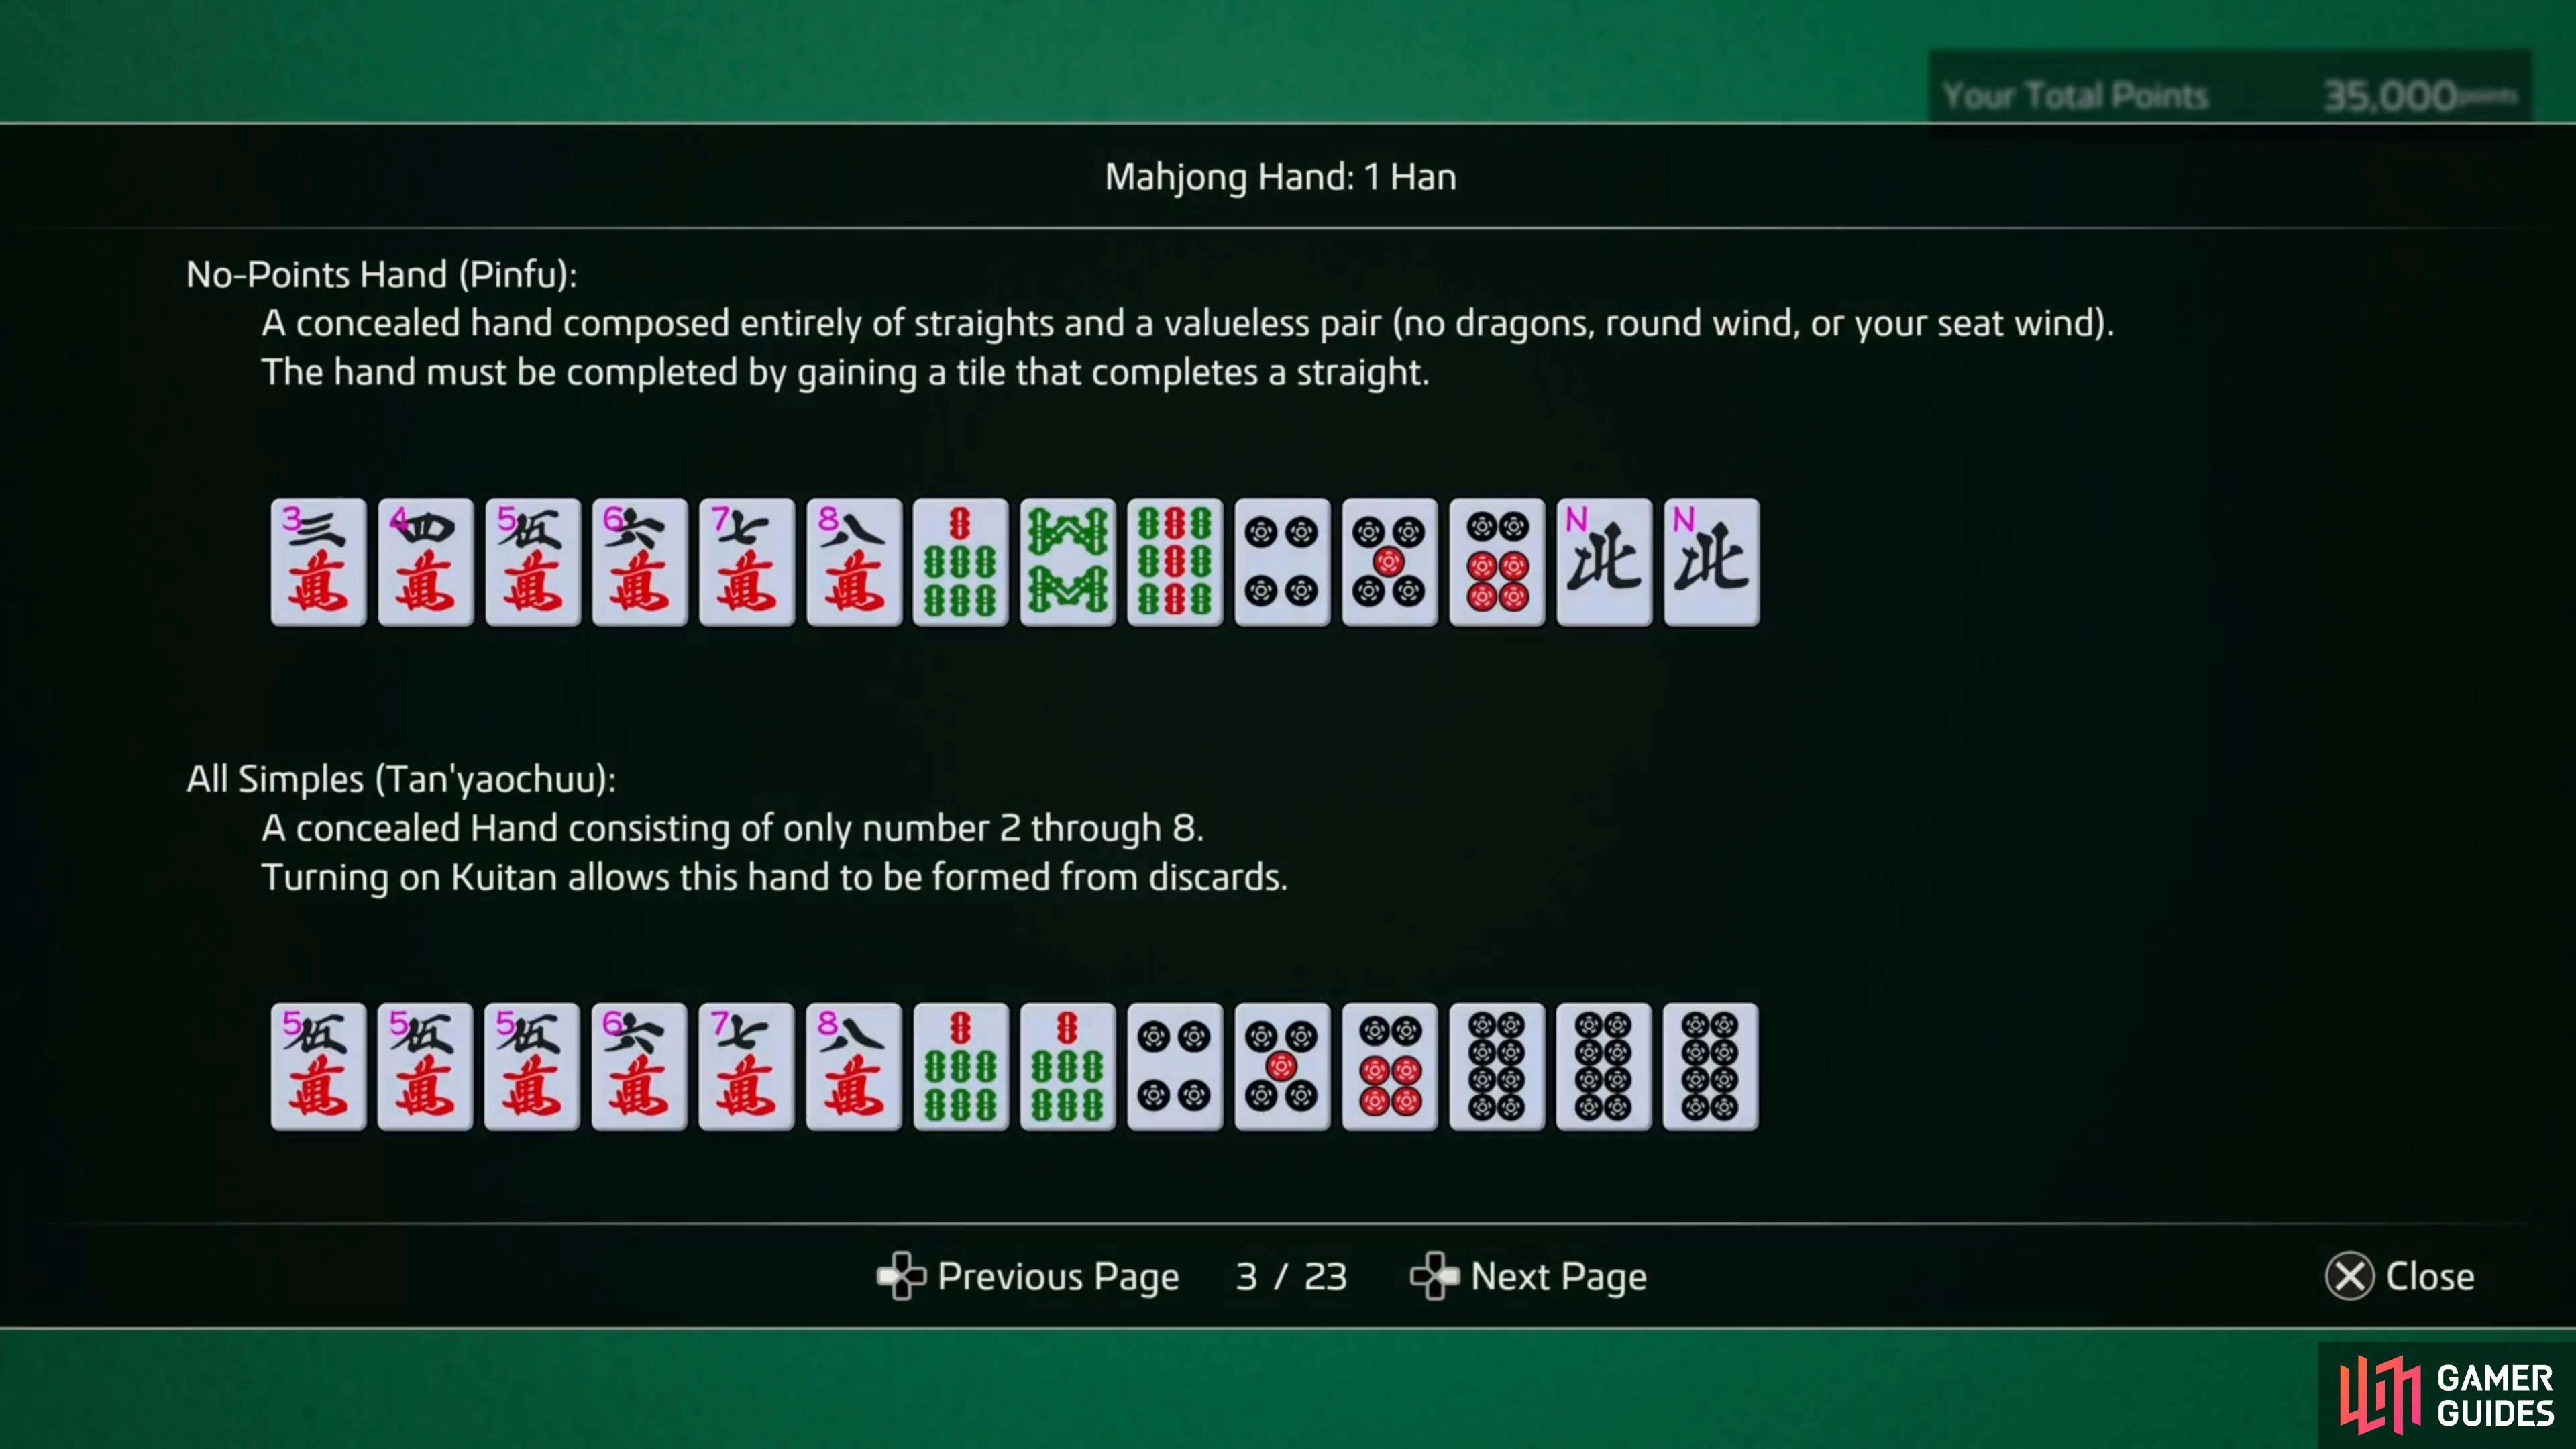 The in-game help files show all of the different kinds of hands with which you can win